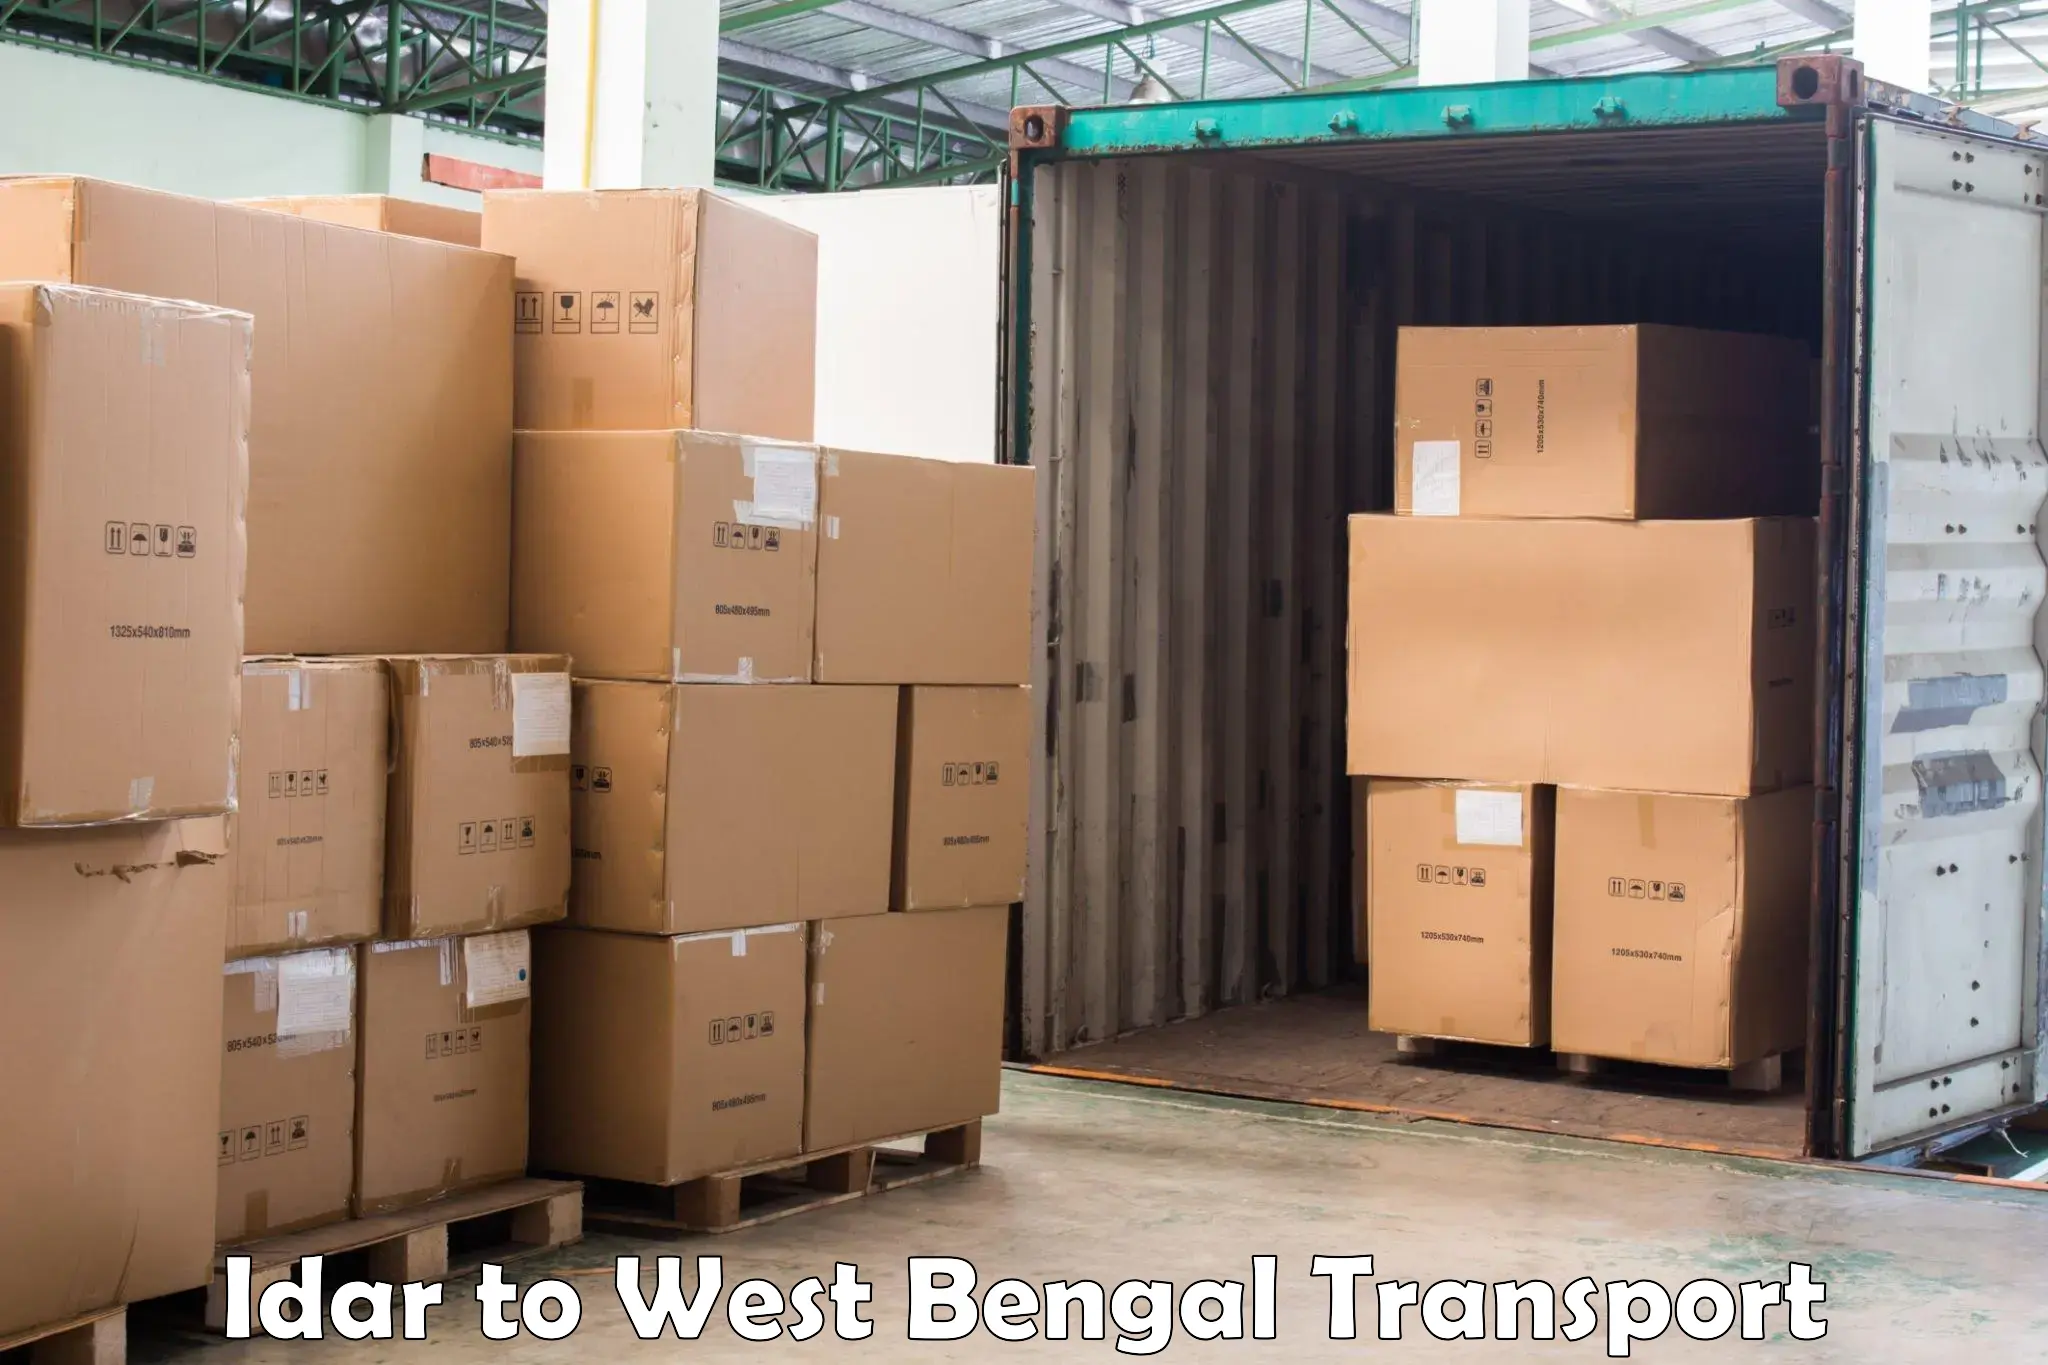 Container transport service Idar to West Bengal